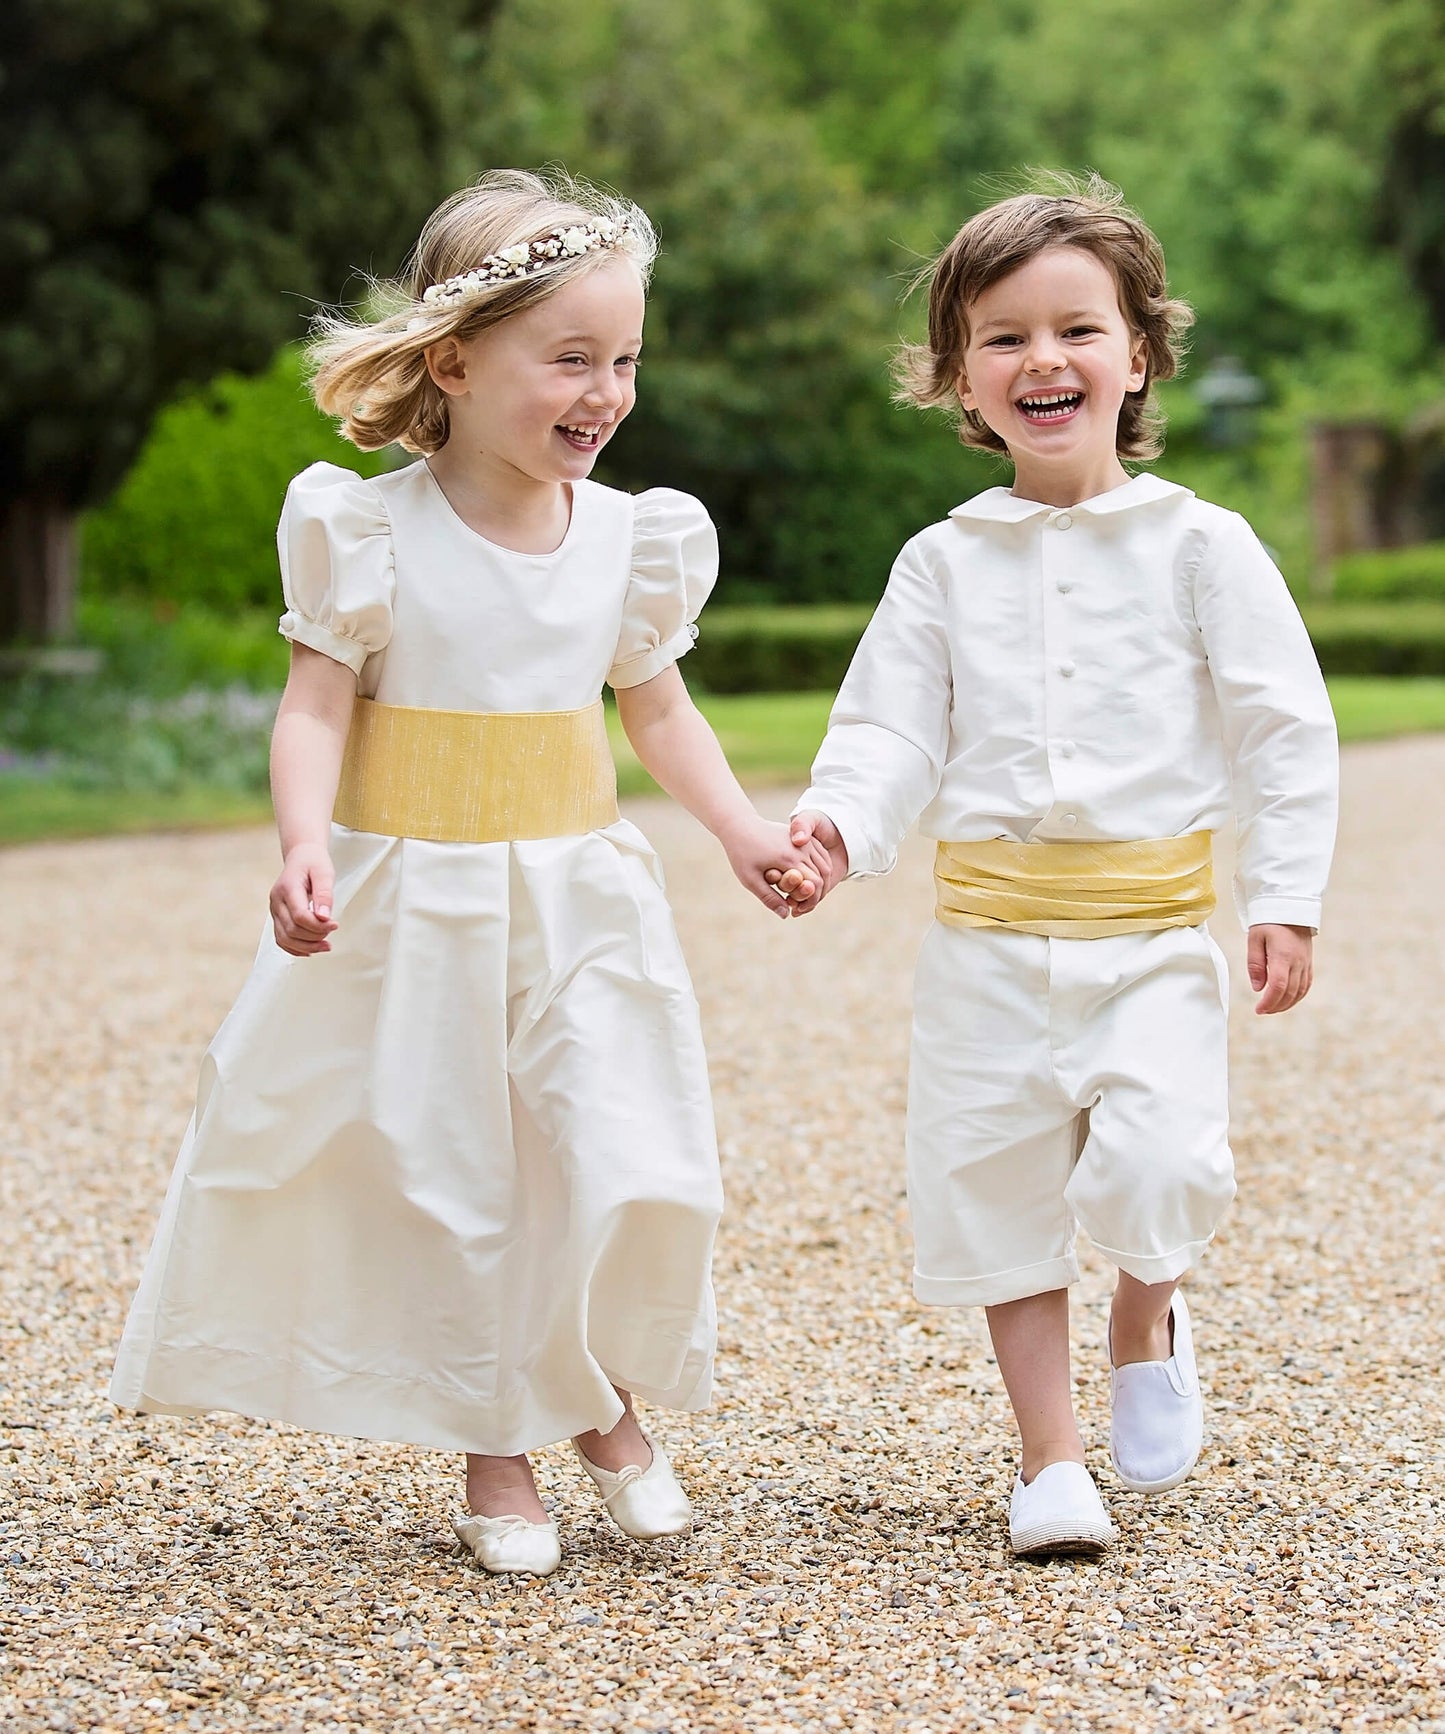 Ivory silk bridesmaid and pageboy outfit with Yellow Sashes by Amelia Brennan Weddings